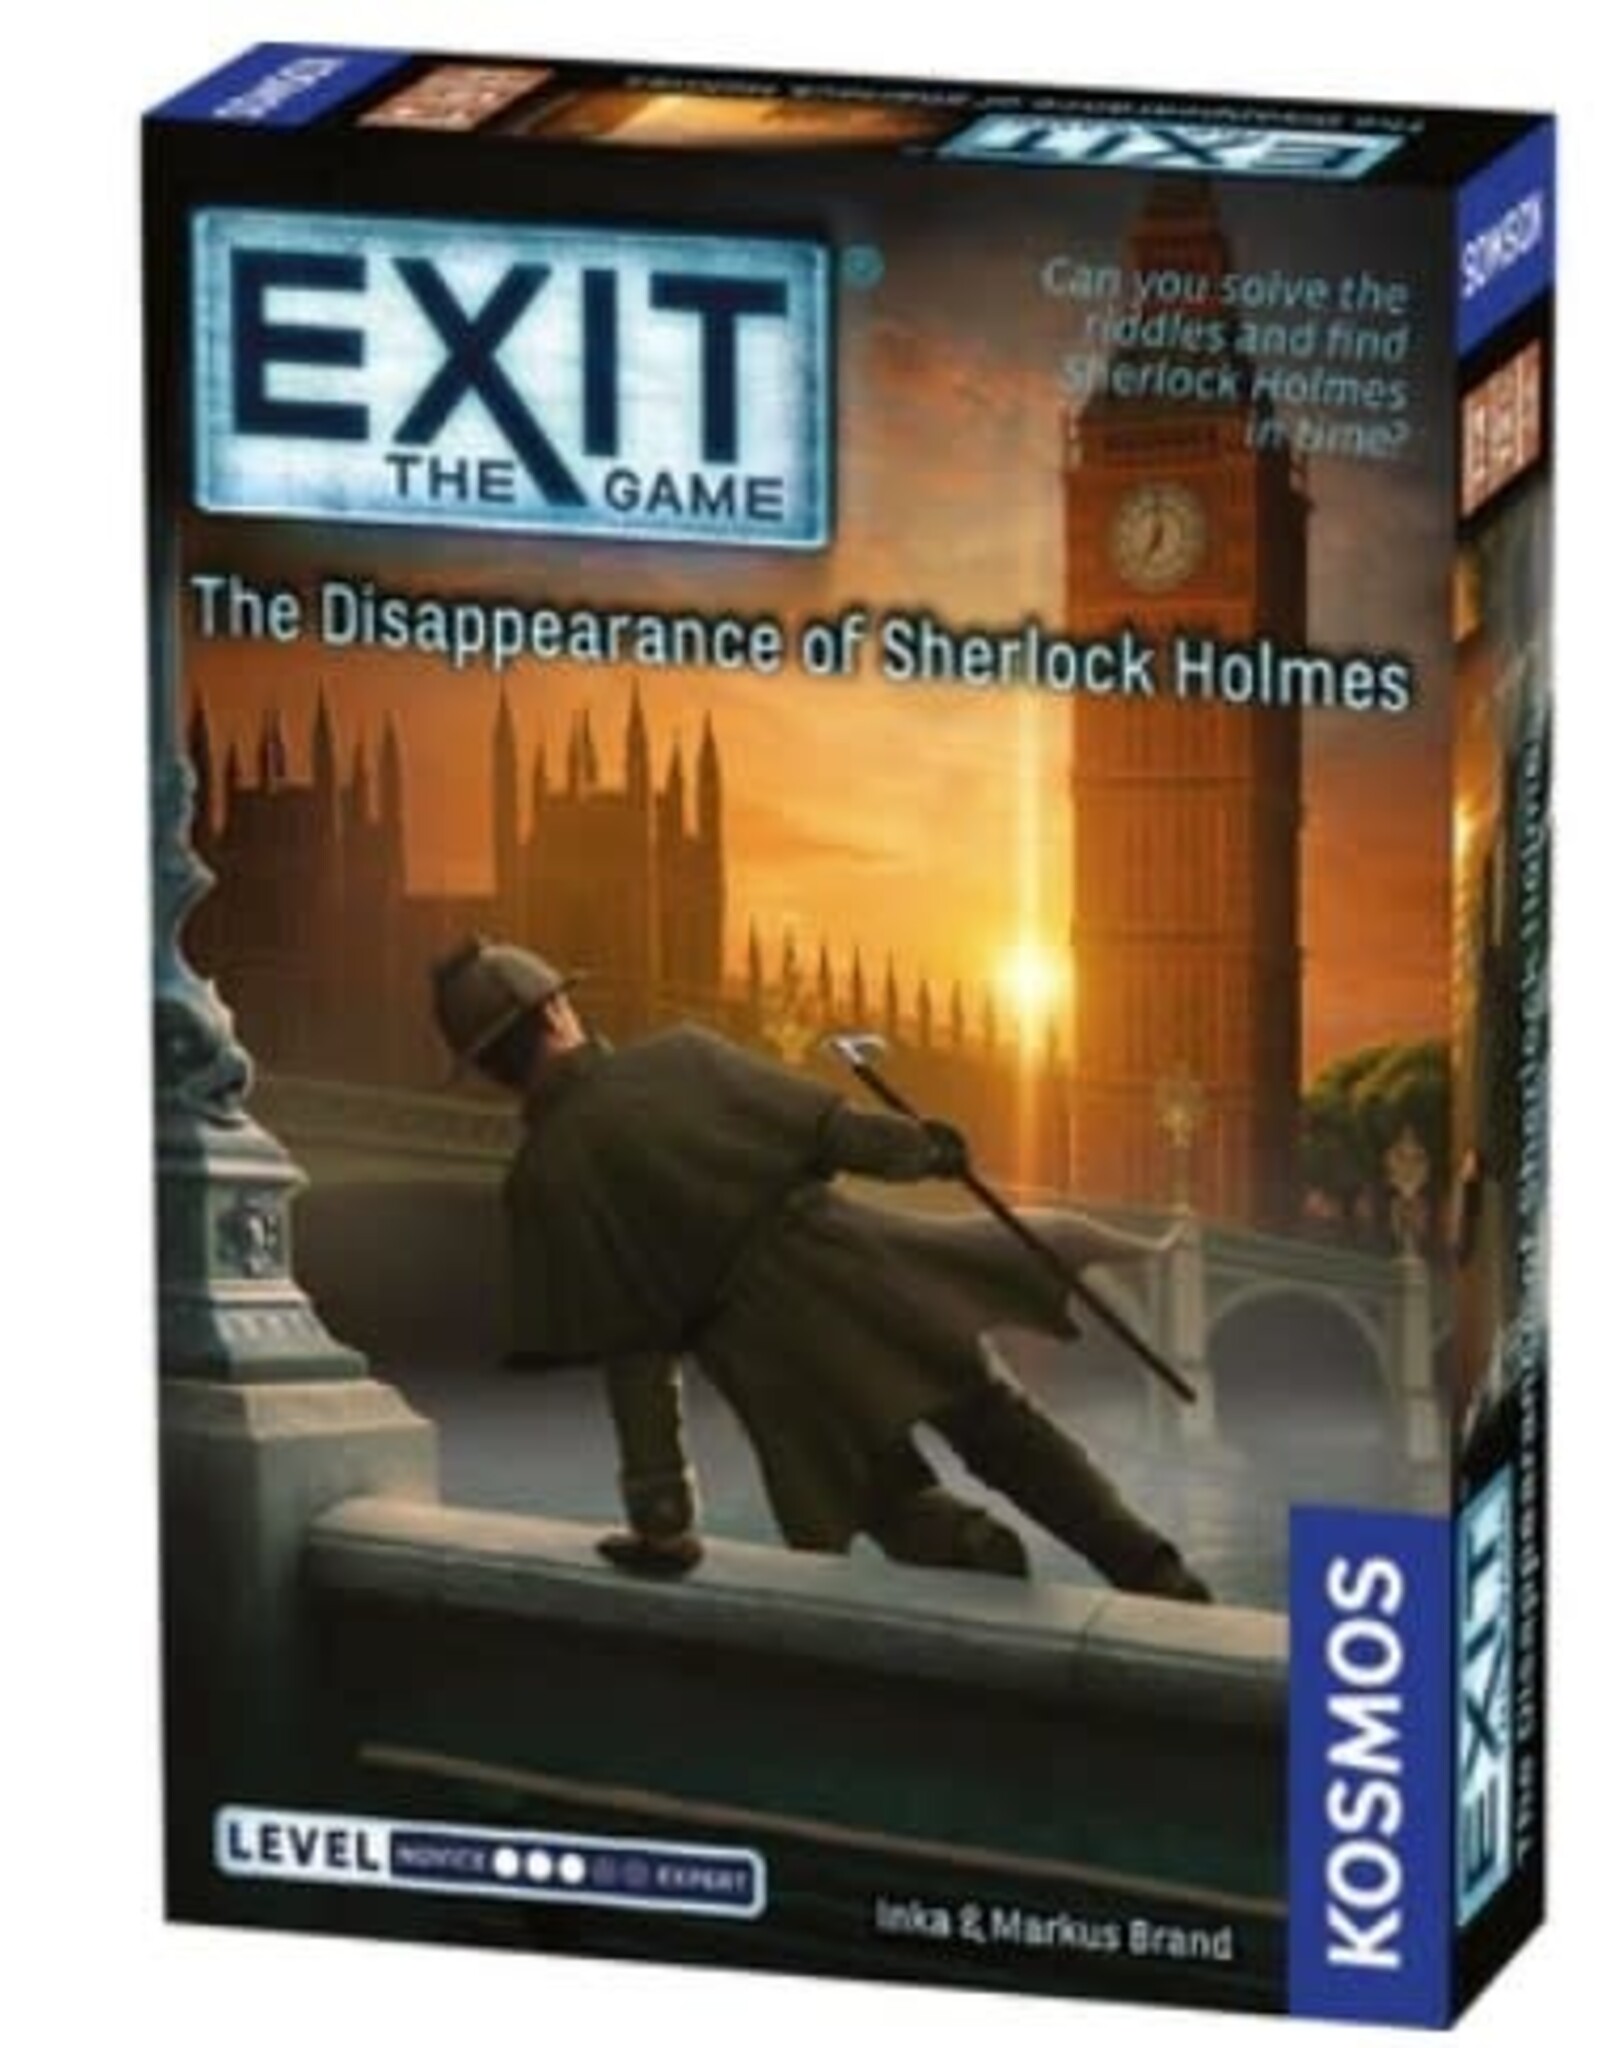 Thames & Kosmos EXIT - THE GAME - THE DISAPPEARANCE OF SHERLOCK HOLMES